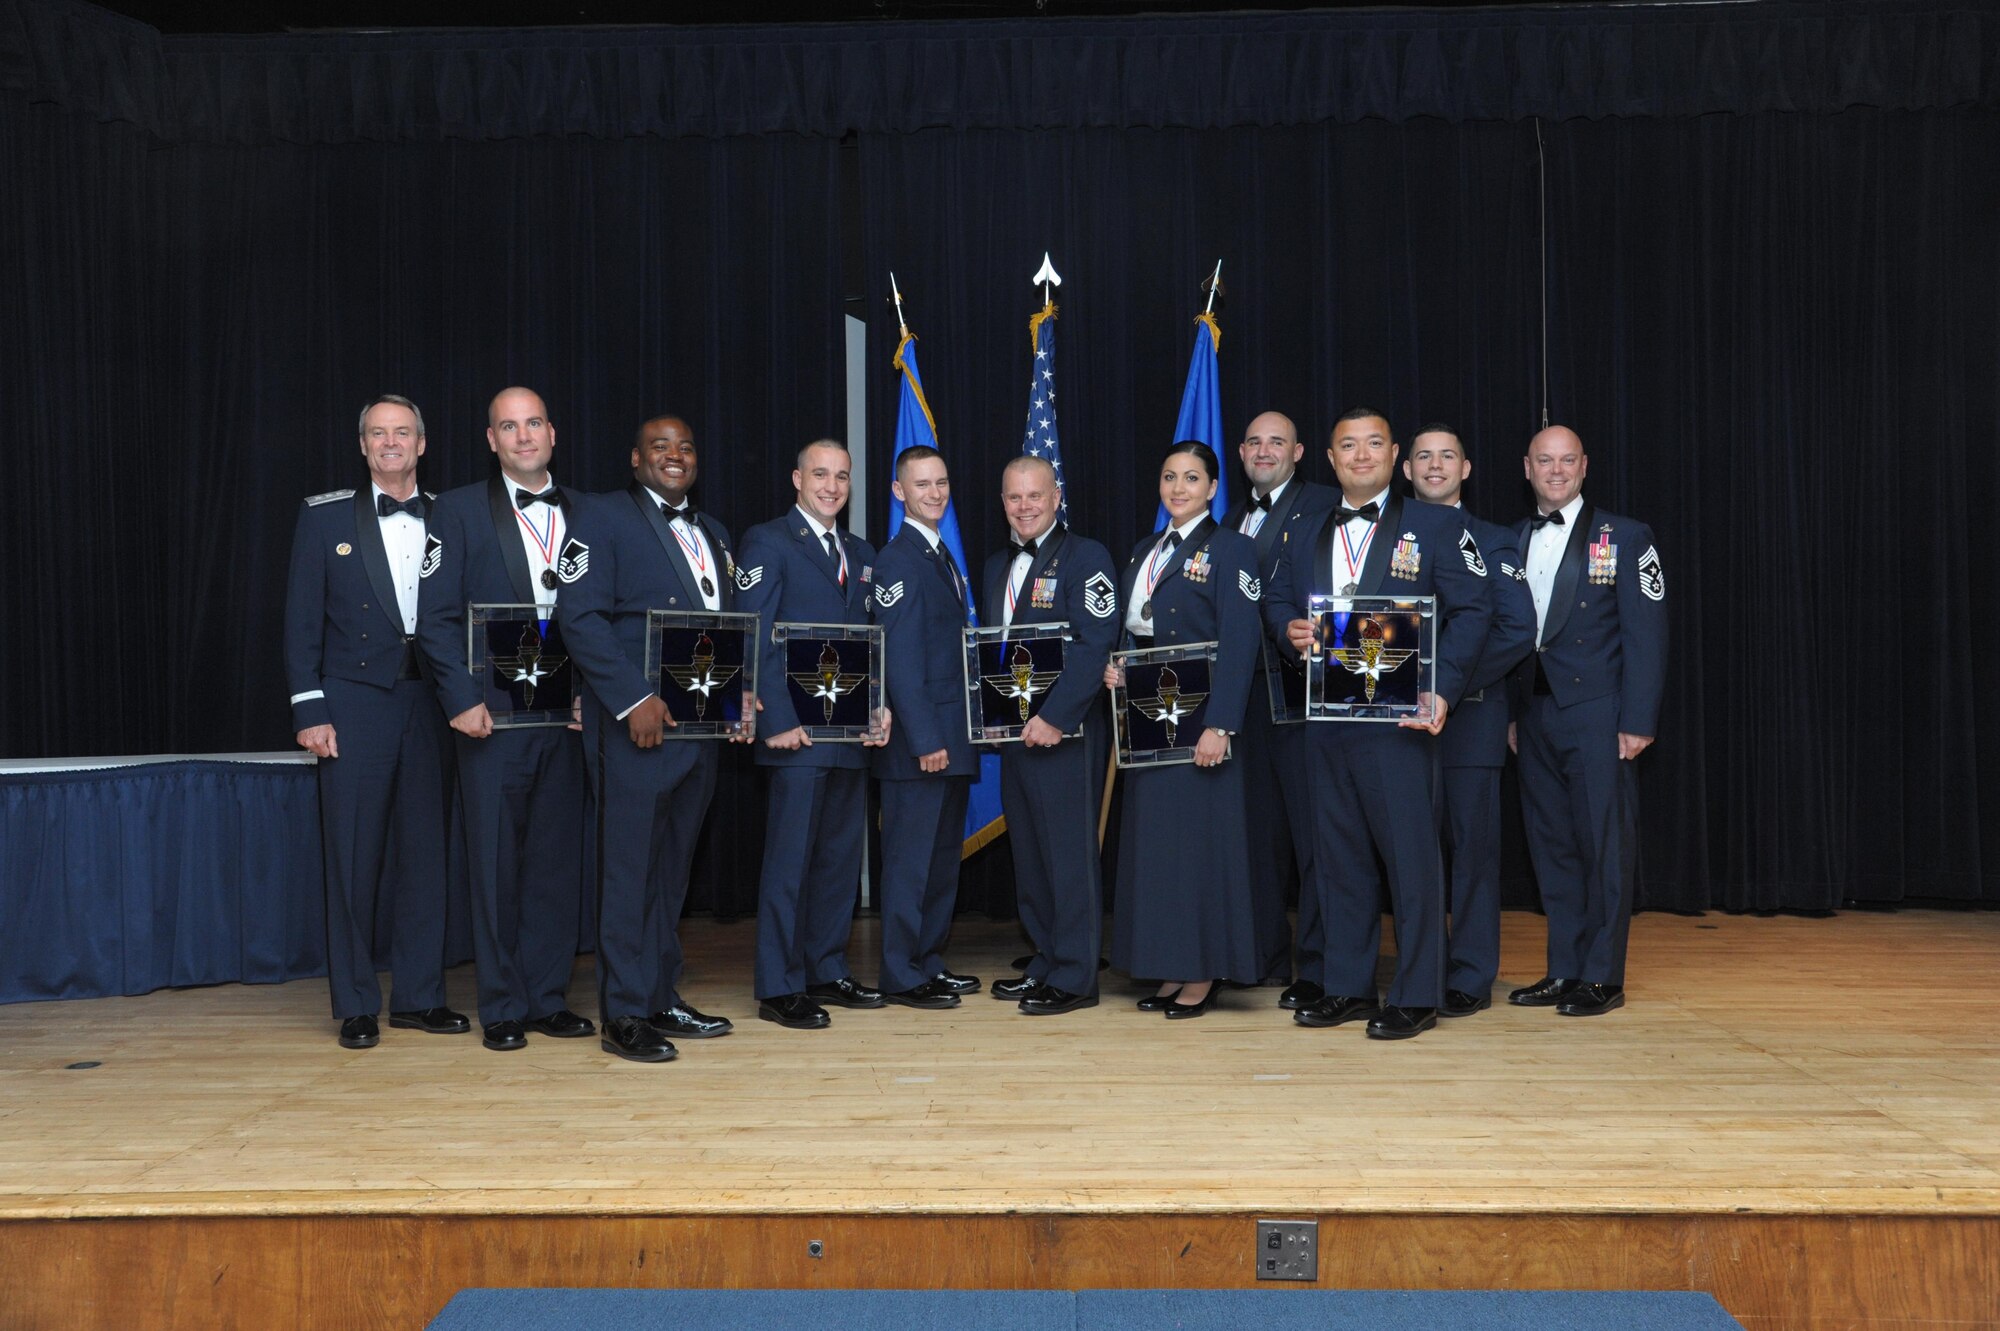 Lt. Gen. Darryl Roberson, commander, Air Education and Training Command and AETC Command Chief Master Sgt. David Staton pose for a photo with the AETC Outstanding Airmen of the Year at a ceremony here, June 16. The award distinguishes AETC’s enlisted Airmen for their leadership, job performance, community involvement and personal achievements. (U.S. Air Force photo by Joel Martinez)